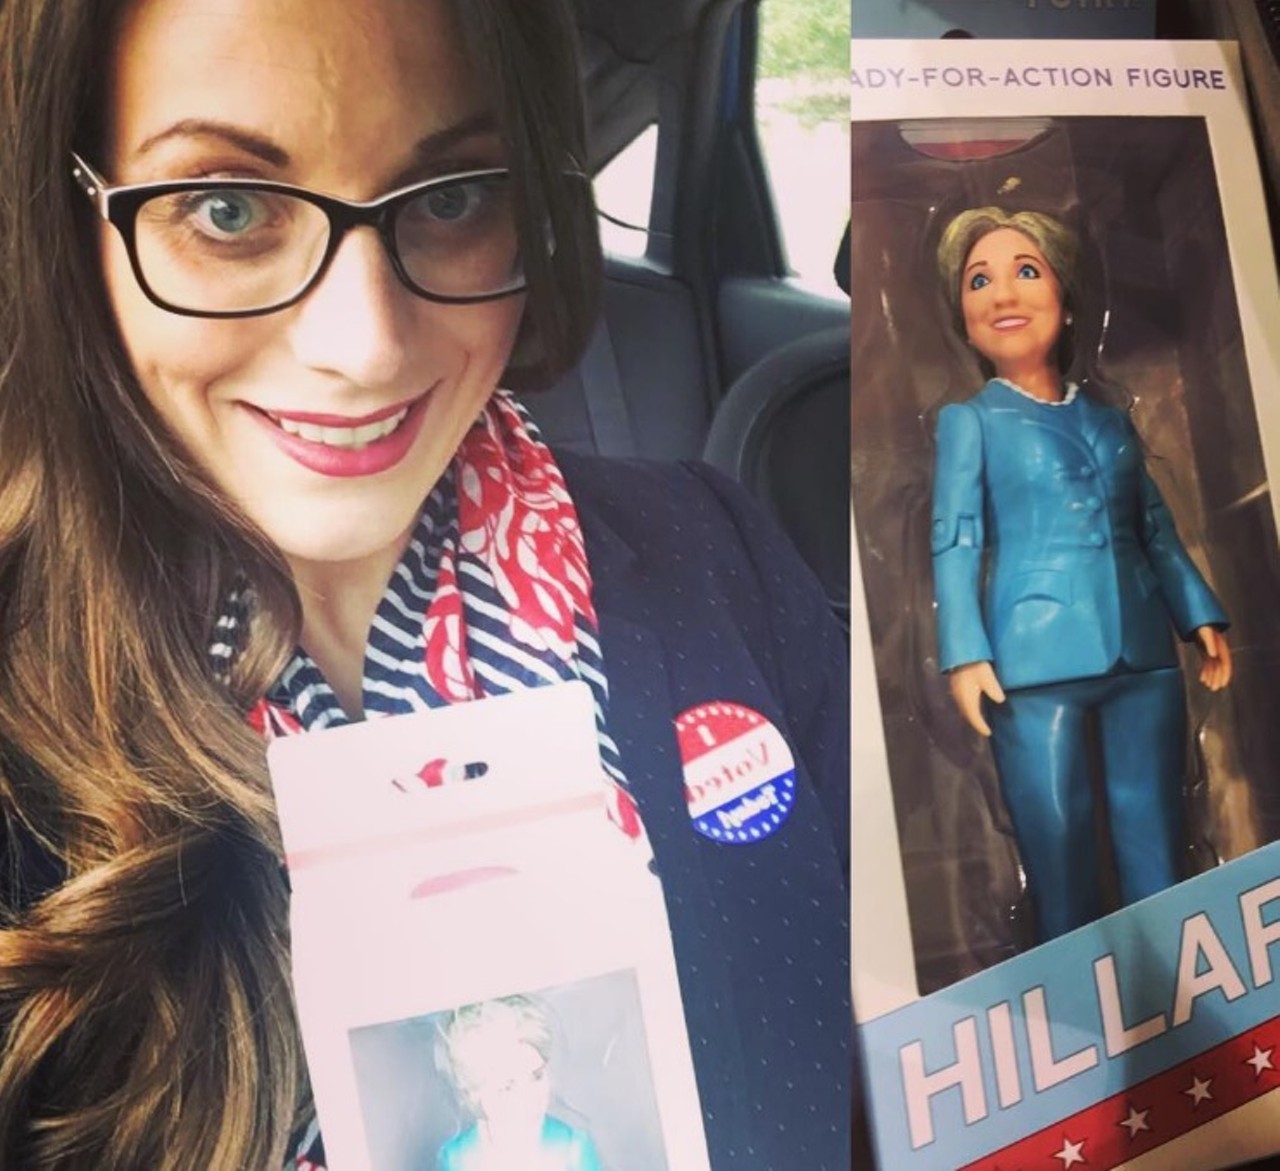 Pantsuit? Check. Hillary Clinton ready-for-action figure? Check. "I Voted" sticker? Got that, too. Photo courtesy of Instagram / laurendurand314.